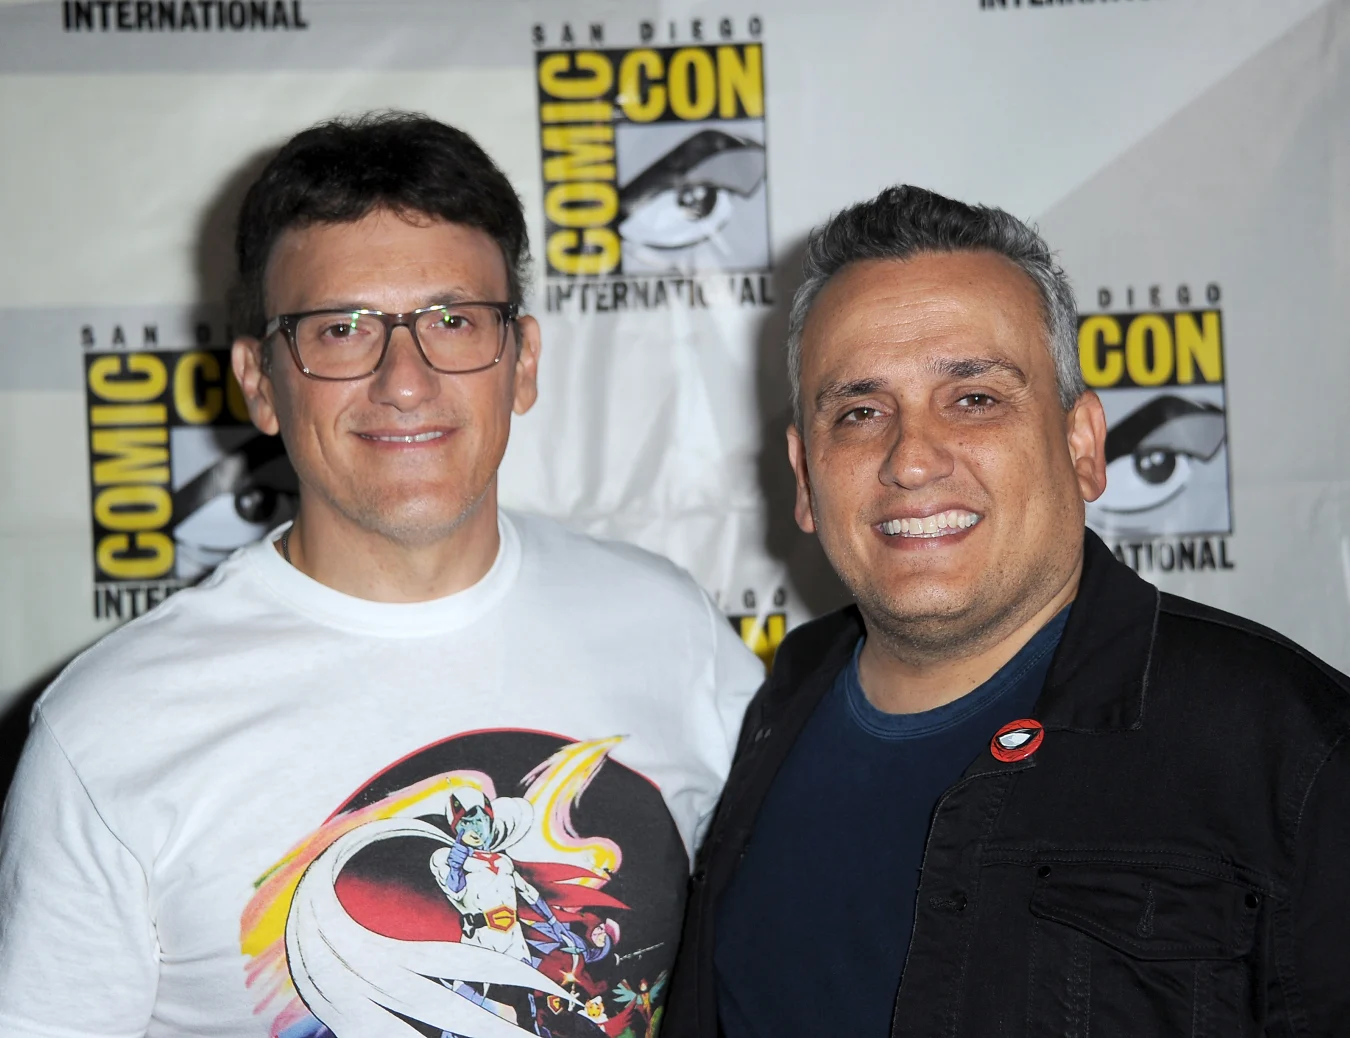 SAN DIEGO, CALIFORNIA - JULY 19: Anthony Russo and Joe Russo attend A Conversation With The Russo Brothers during 2019 Comic-Con International at San Diego Convention Center on July 19, 2019 in San Diego, California. (Photo by Albert L. Ortega/Getty Images)